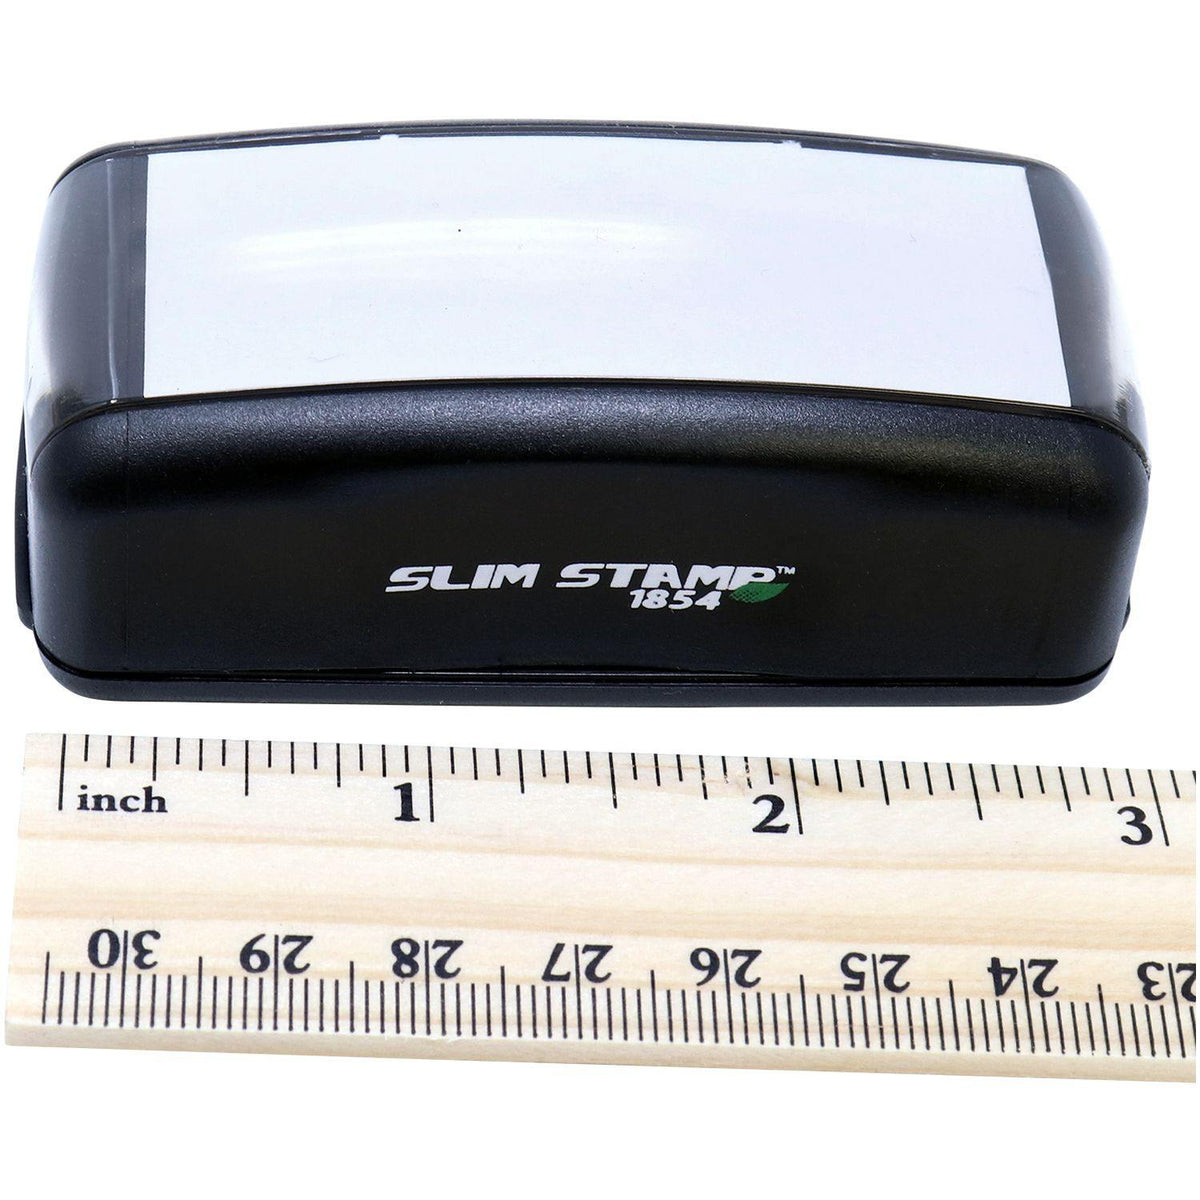 Measurement Large Pre Inked First Class Stamp with Ruler